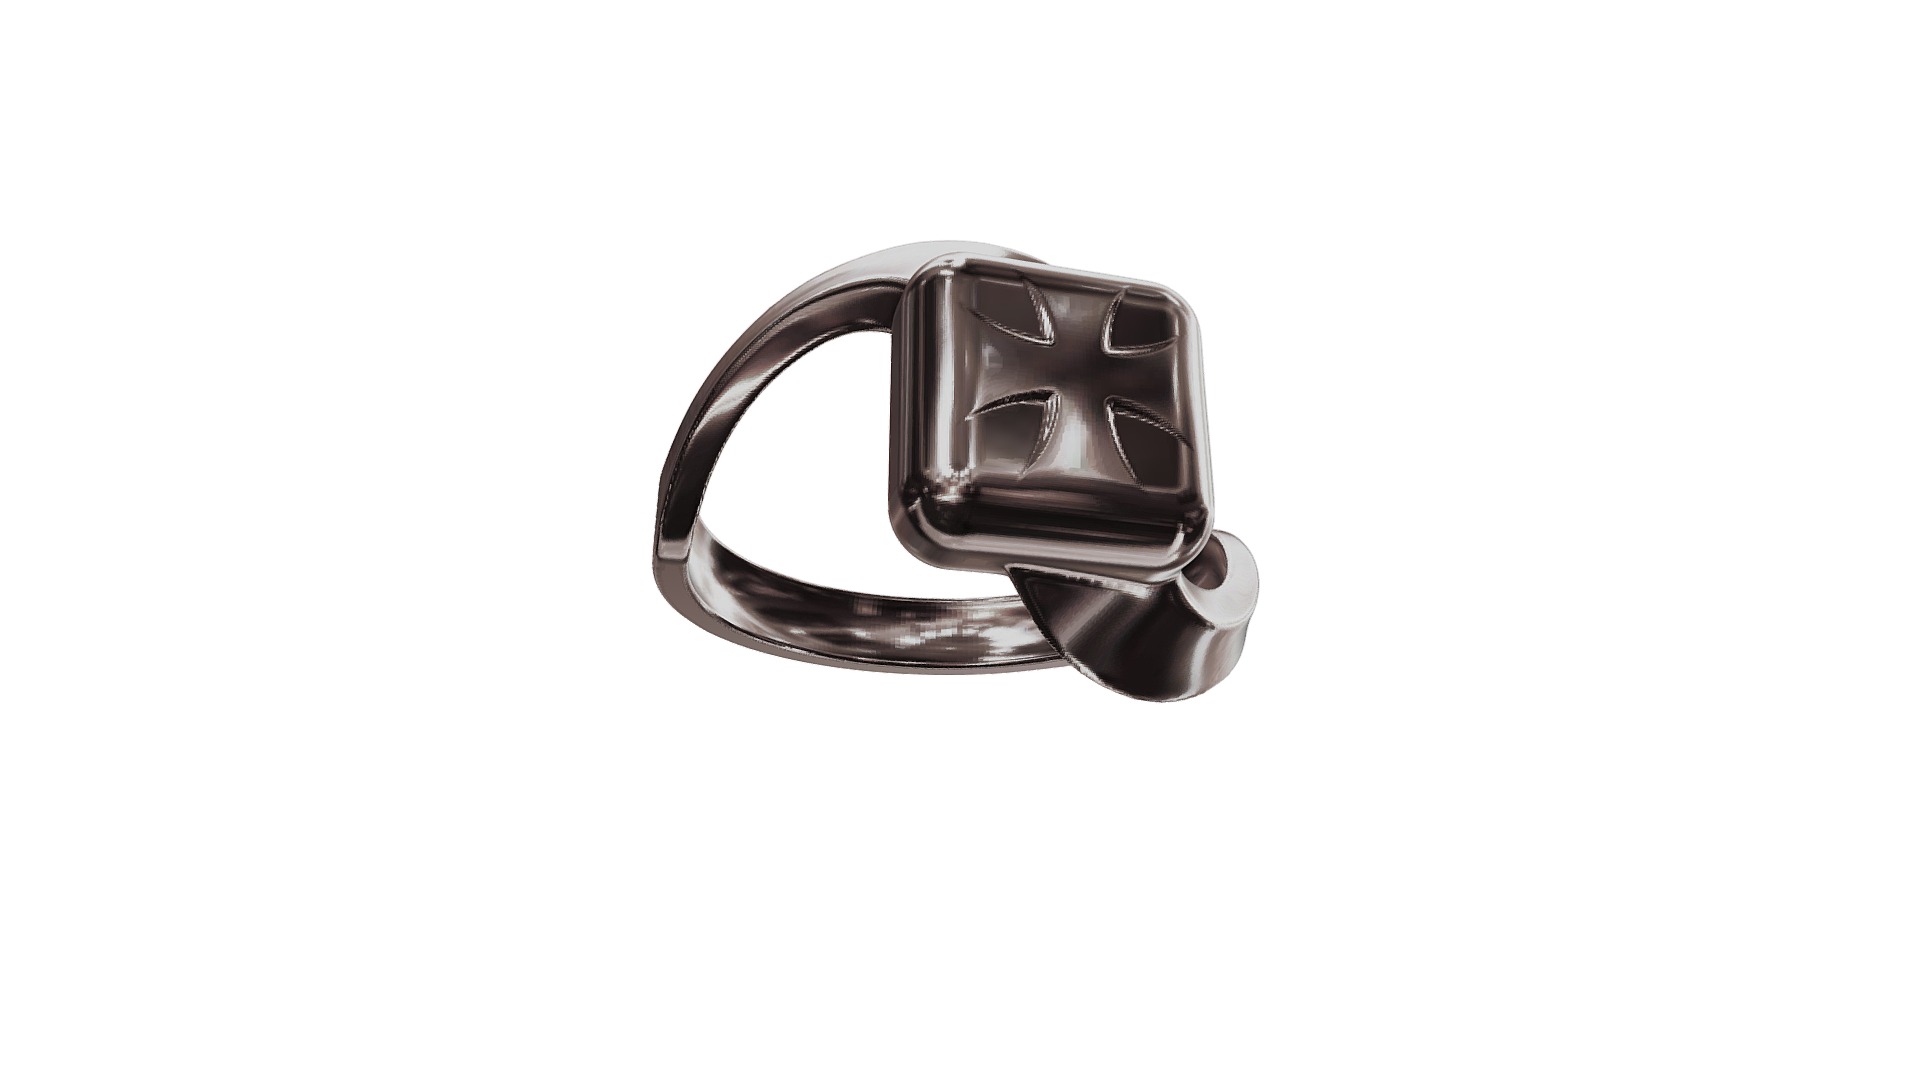 3D model Cube twist ring - This is a 3D model of the Cube twist ring. The 3D model is about a silver ring with a black band.